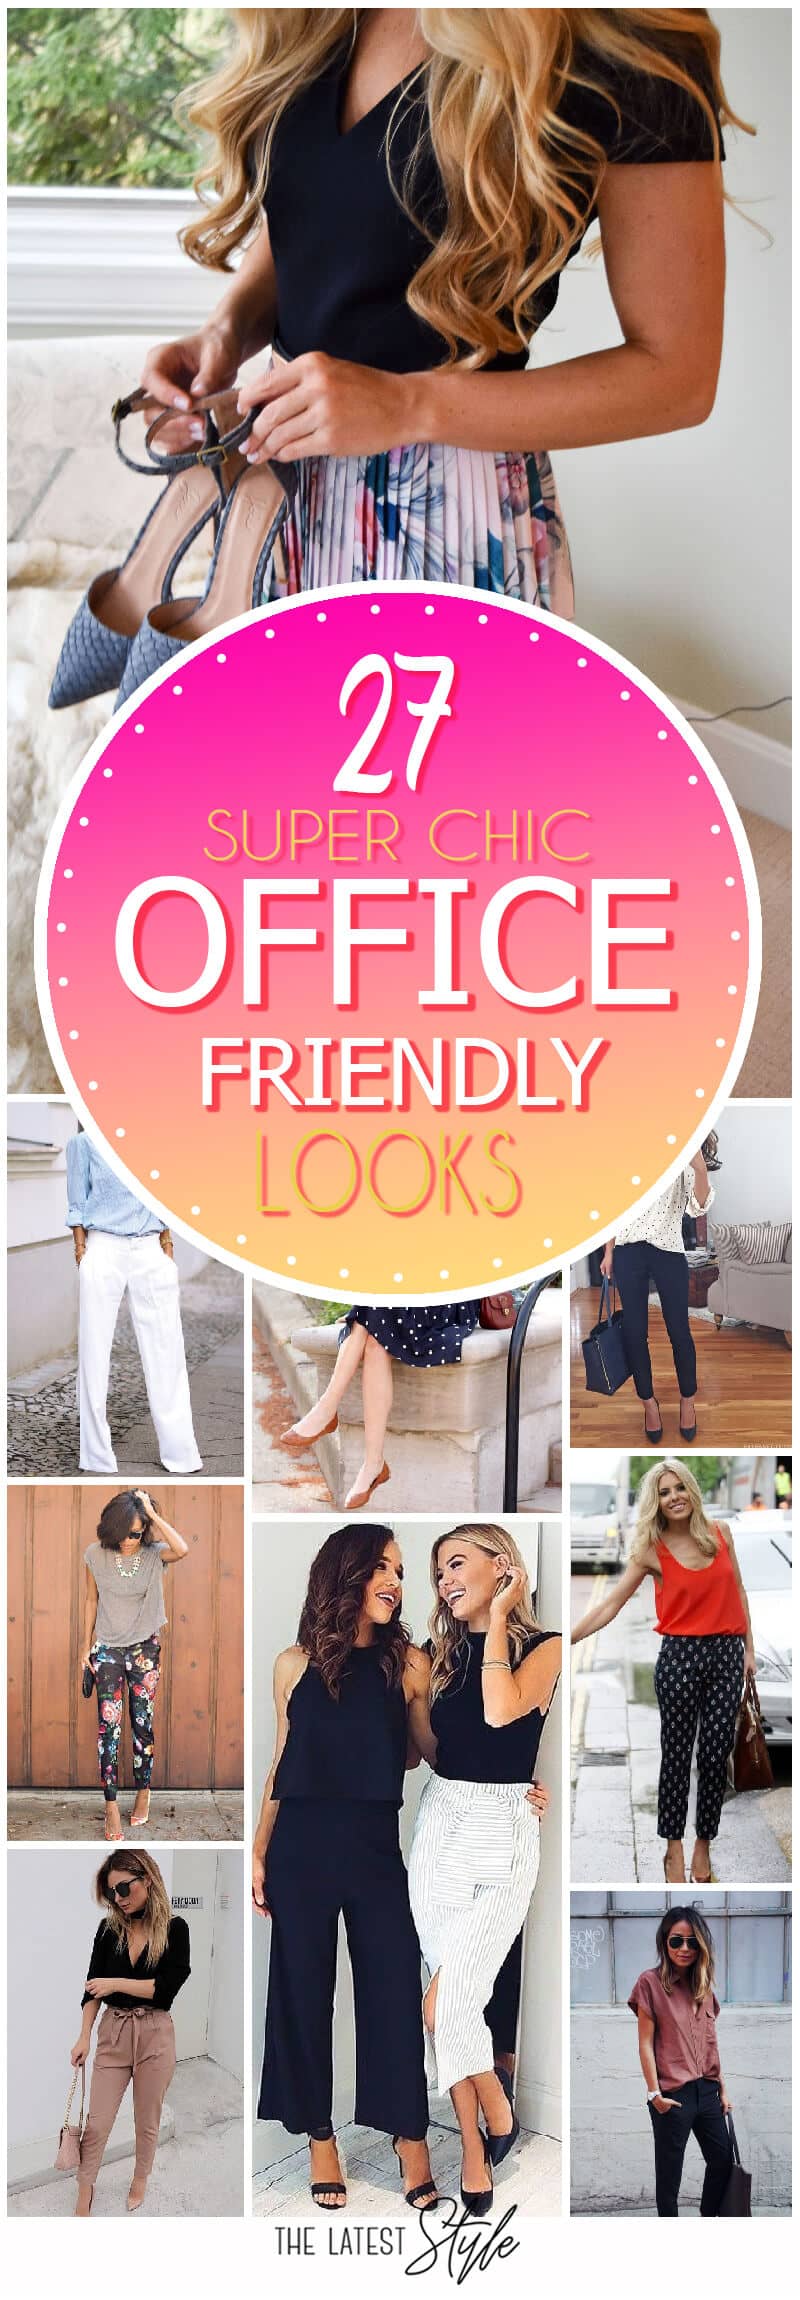 27 Super Chic Office-Friendly Looks For This Summer